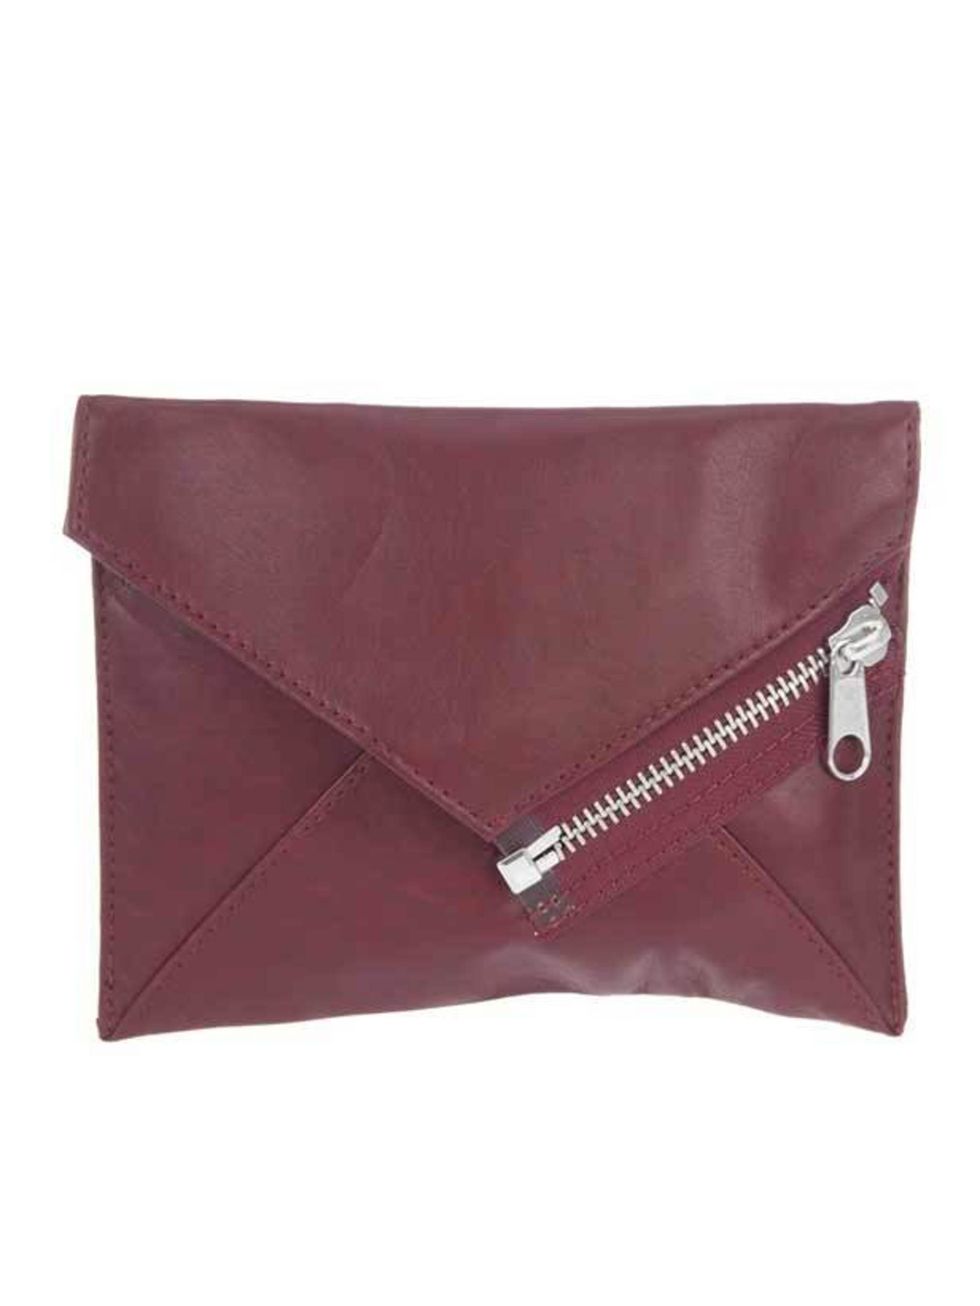 <p> </p><p>Add a purist edge to your winter wardrobe with a leather envelope clutch that will add elegance to any outfit, day or night... Cheap Monday red leather envelope cluth, £23, at <a href="http://www.no-one.co.uk/shopping/women/item10061502.aspx">N